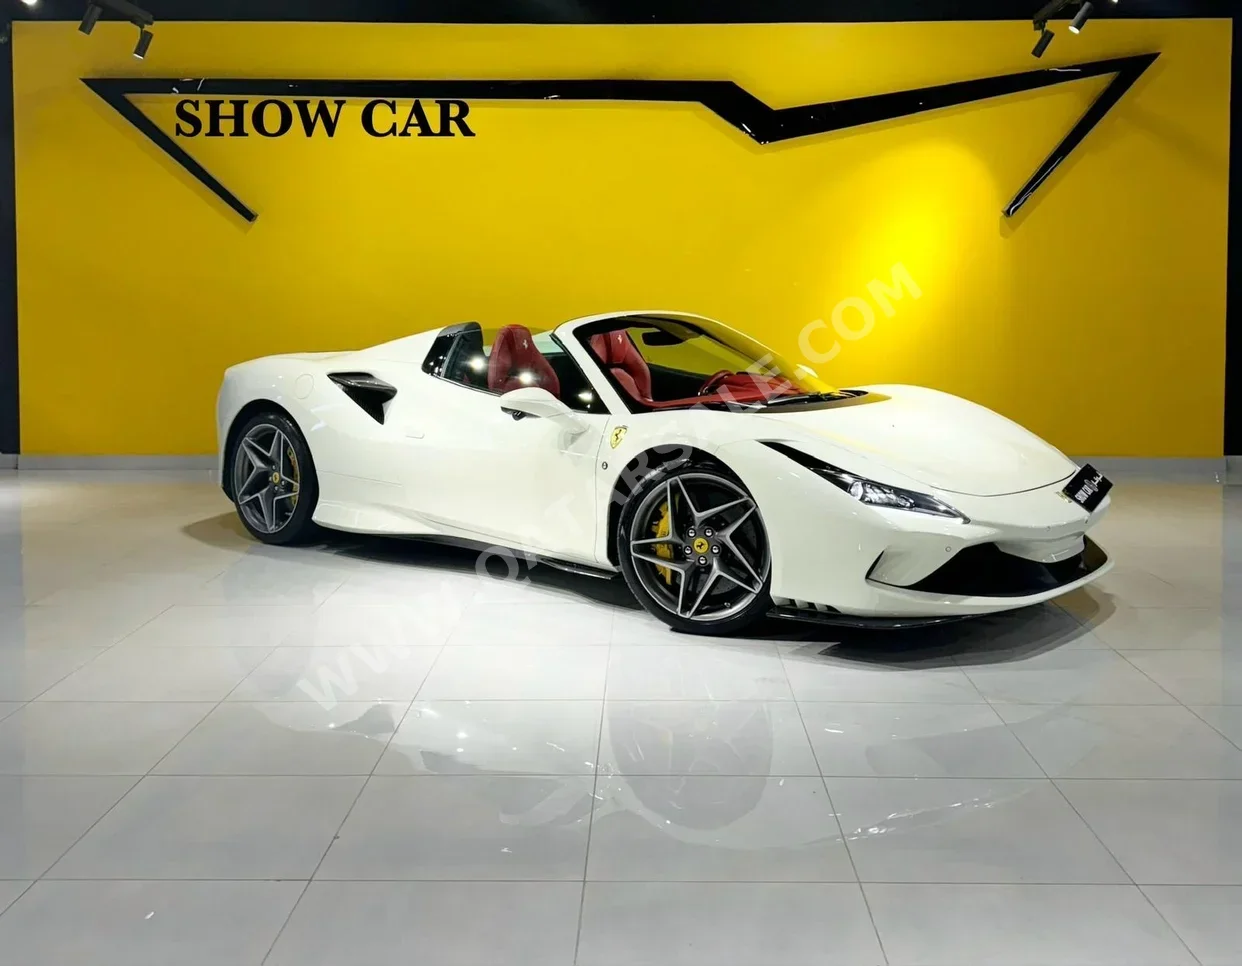 Ferrari  F8  Spider  2021  Automatic  7,200 Km  8 Cylinder  Rear Wheel Drive (RWD)  Coupe / Sport  White  With Warranty